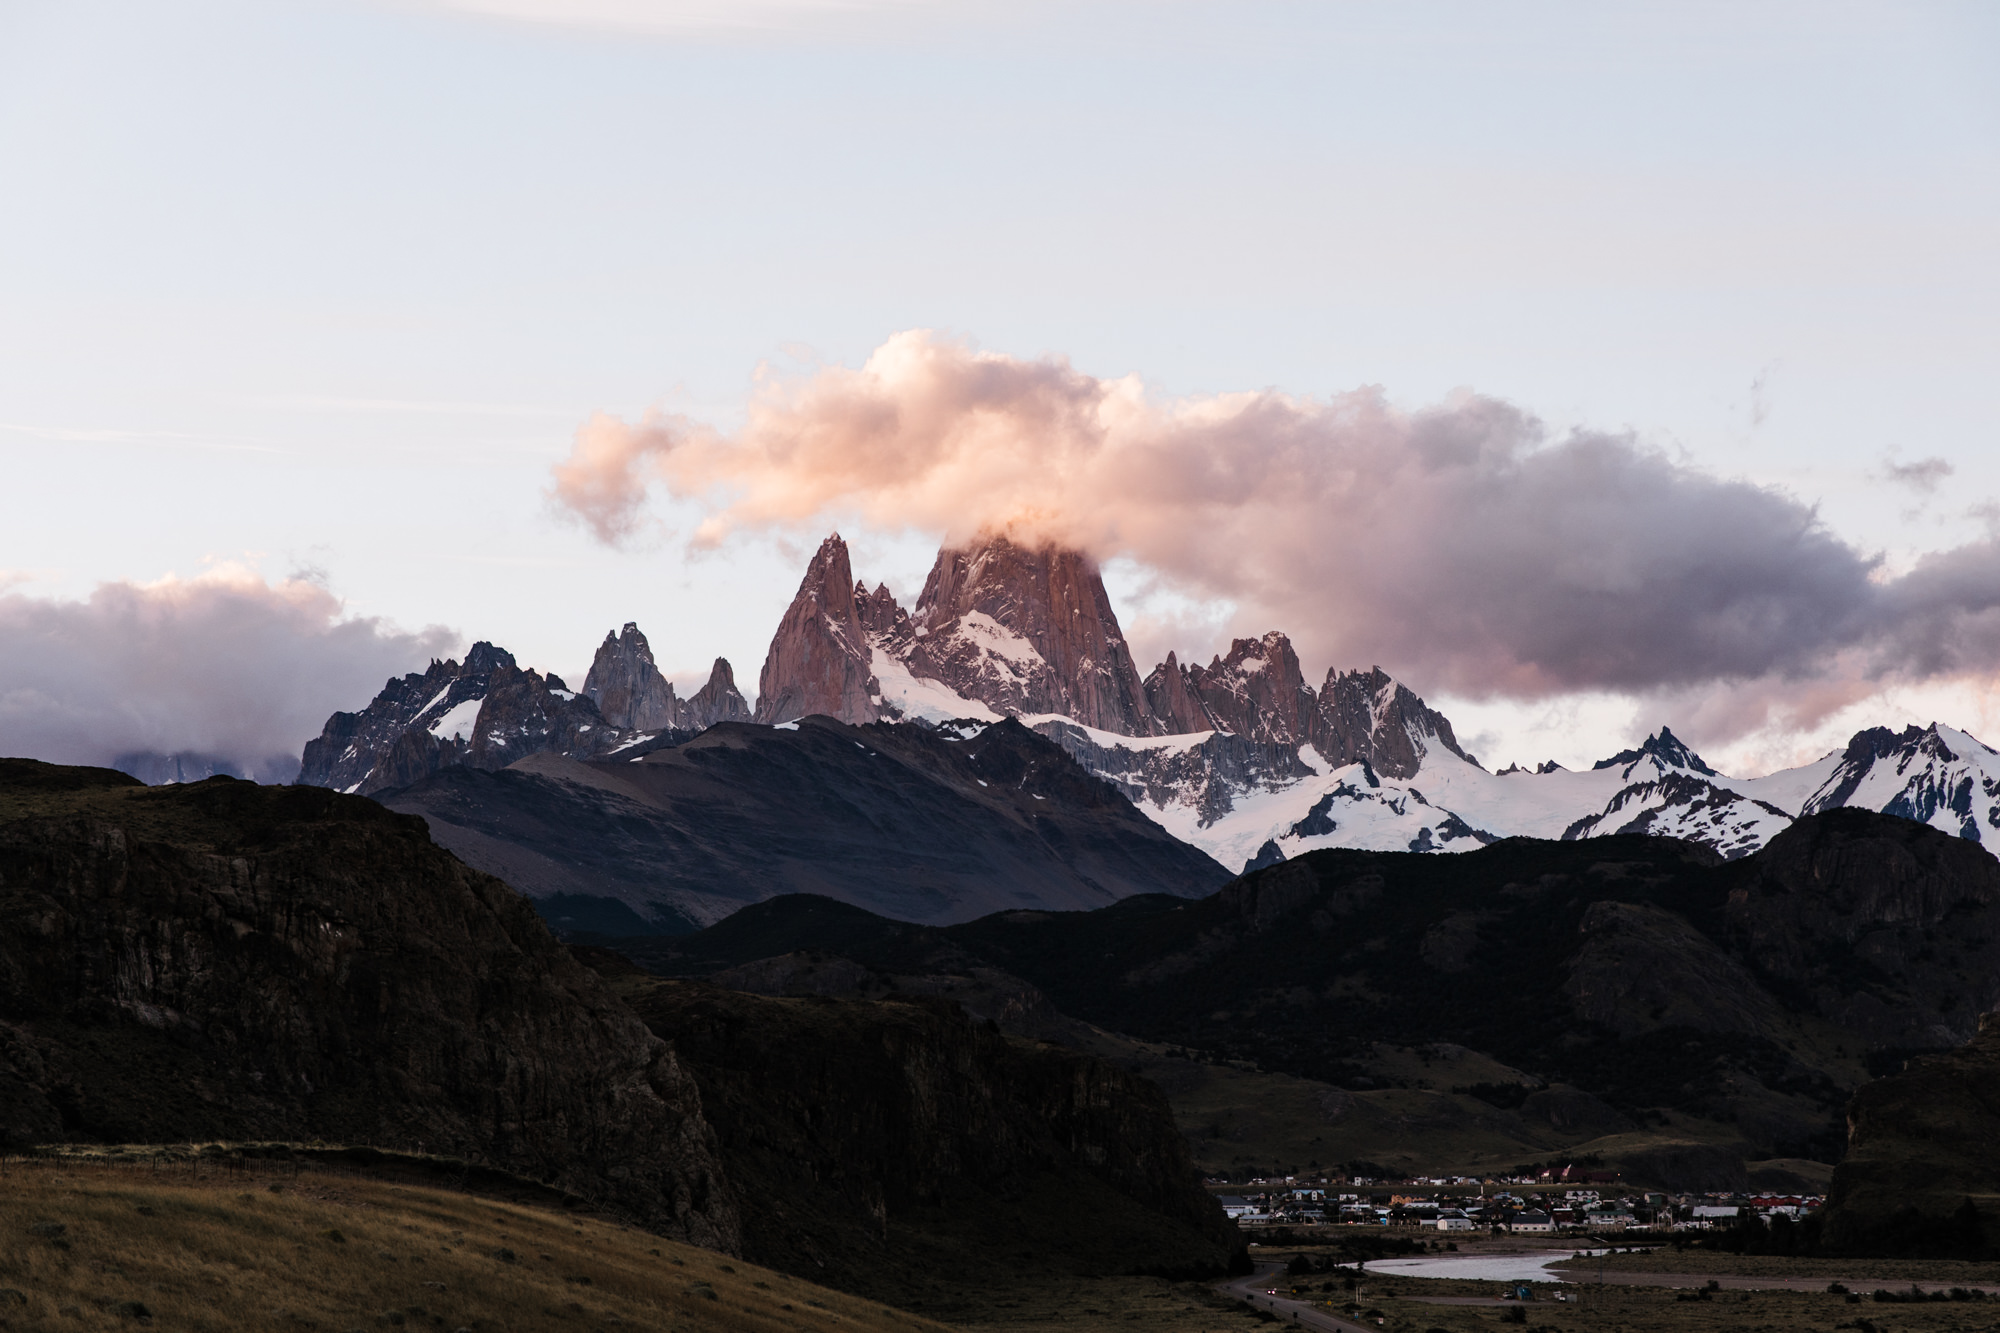 sunset + sunrise in el chalten, argentina | 24 hours of fitz roy | patagonia wedding + elopement photographers | the hearnes adventure photography | www.thehearnes.com